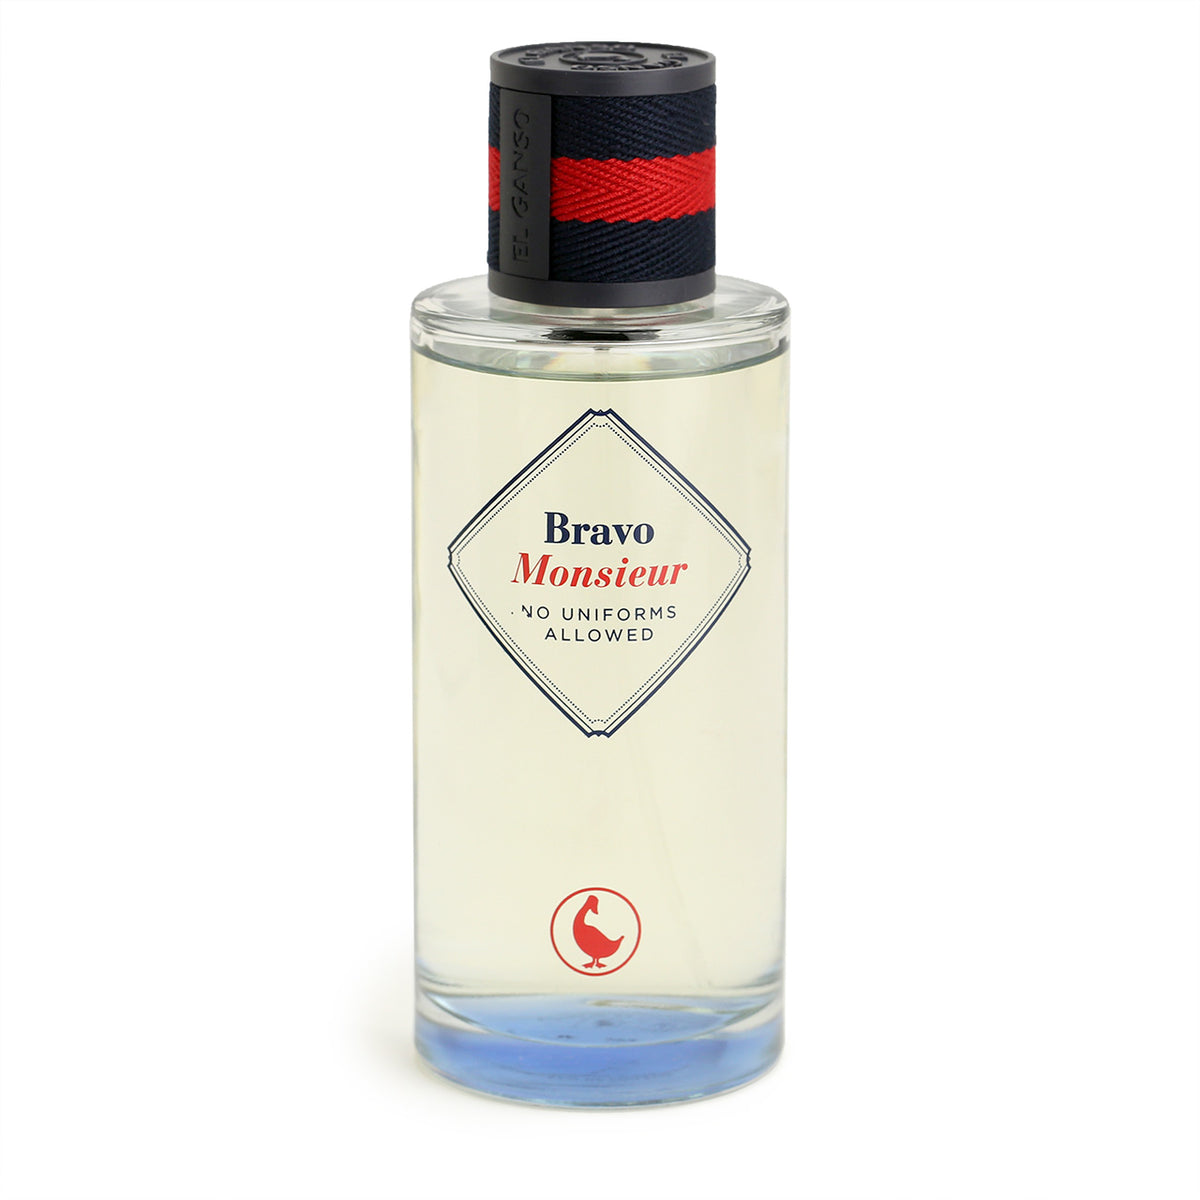 El Ganso Bravo Monsieur EDT bottle with red and black wrapped cap.